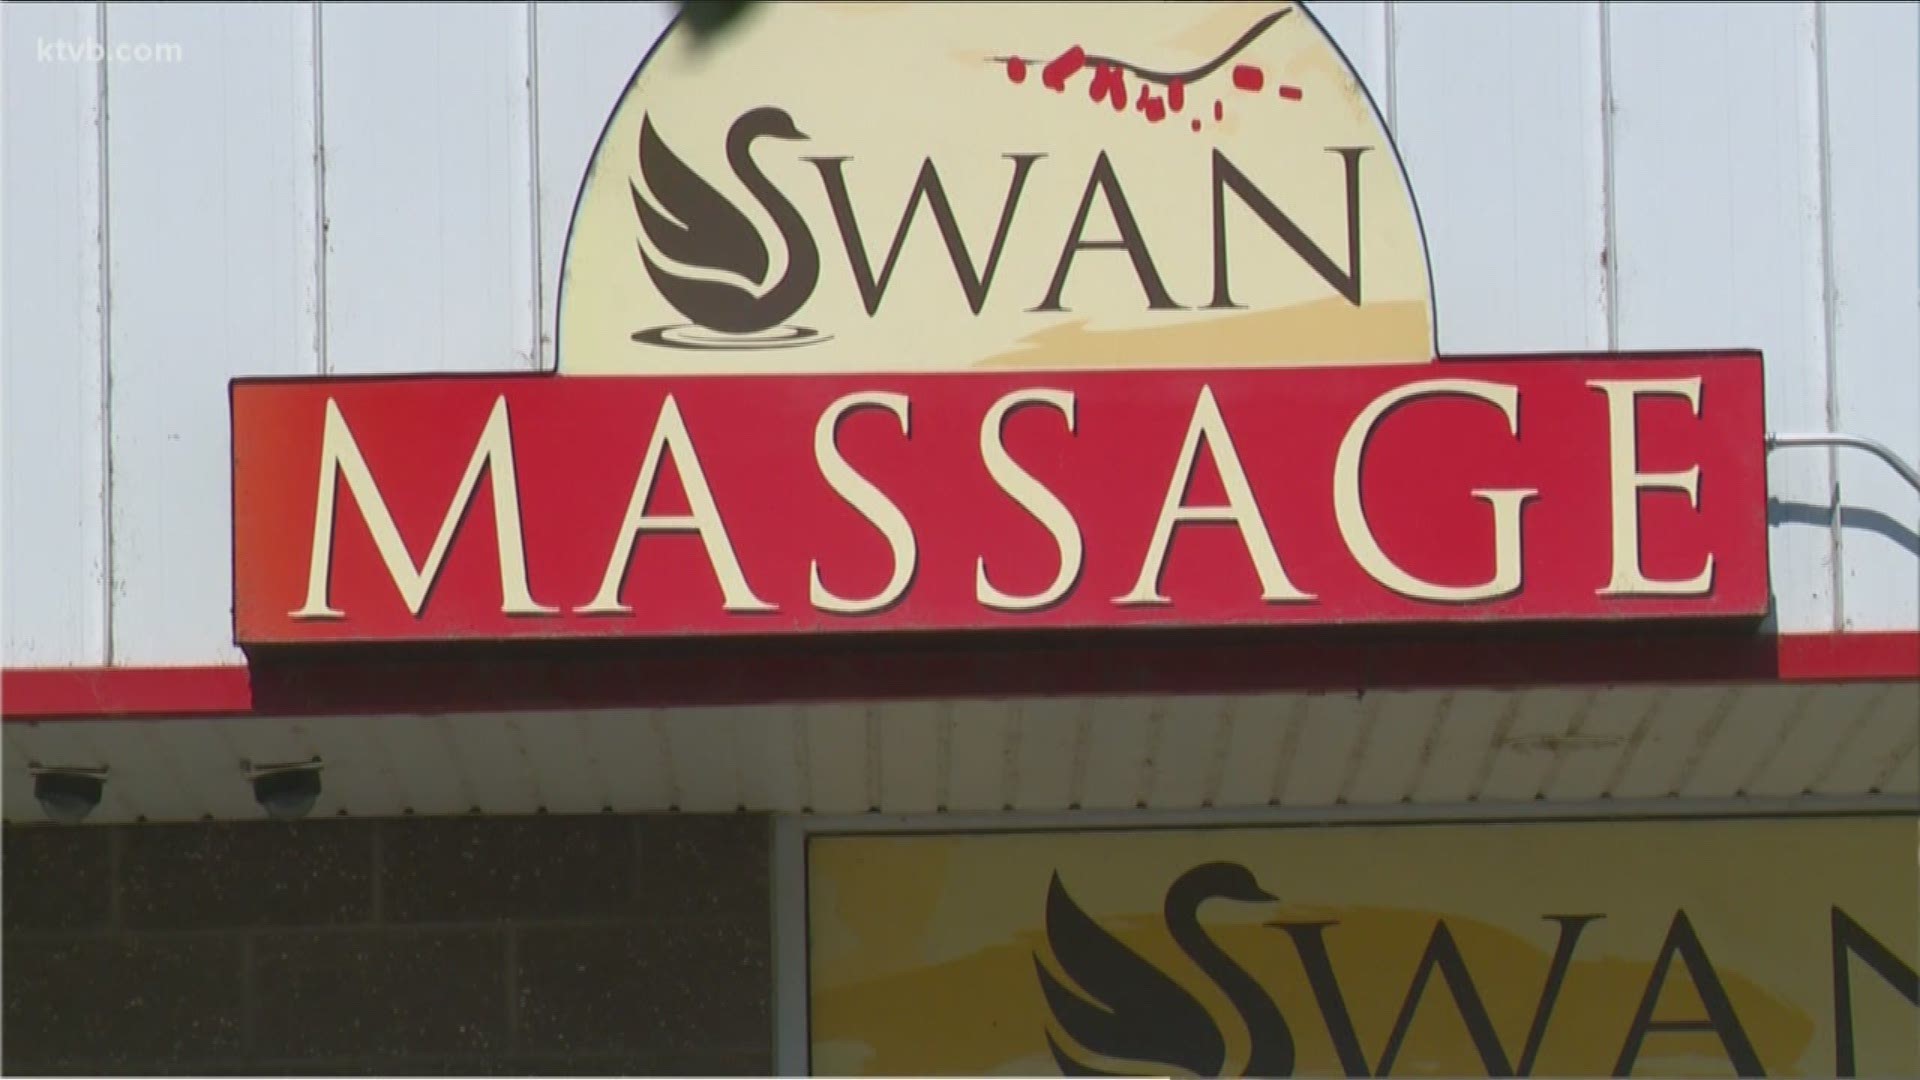 Police say the massage parlor employees were offering sex acts for money.